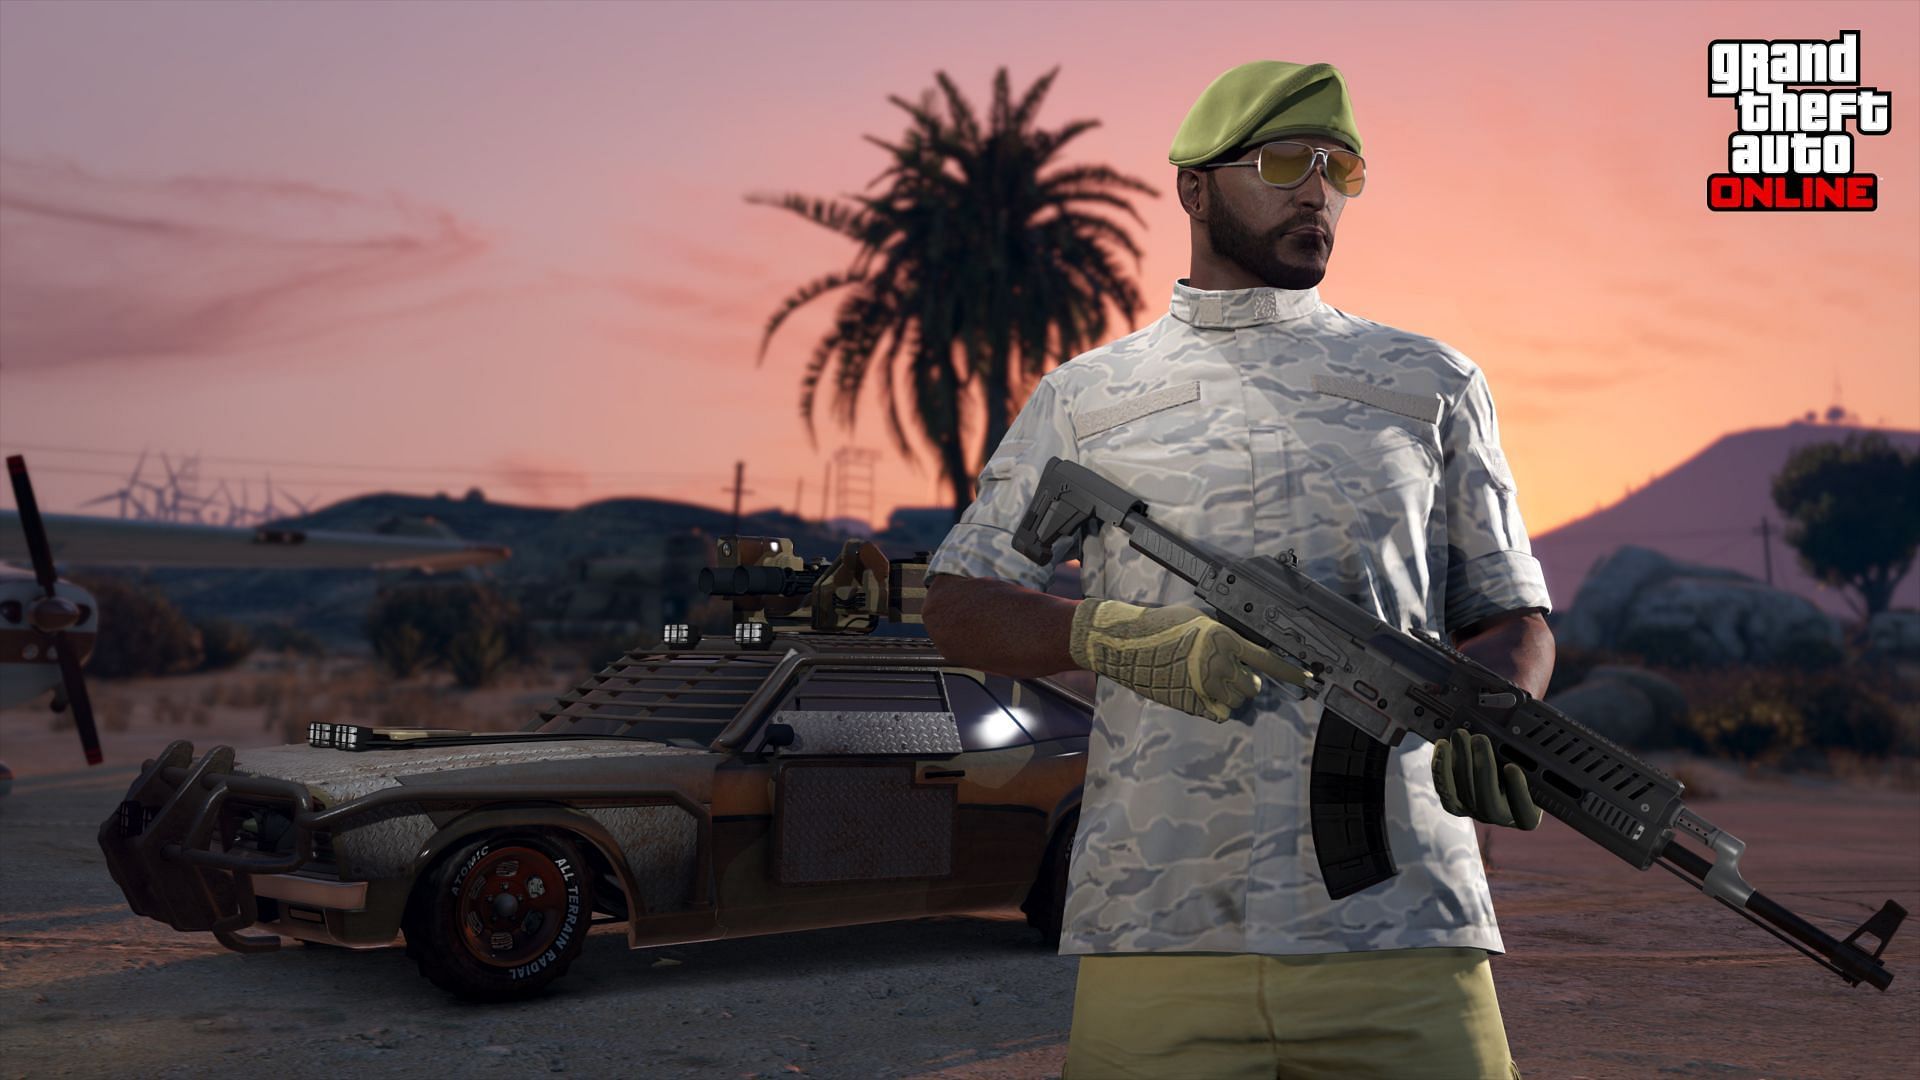 It is possible to play solo in GTA Online with all public lobby features enabled (Image via Rockstar Games)